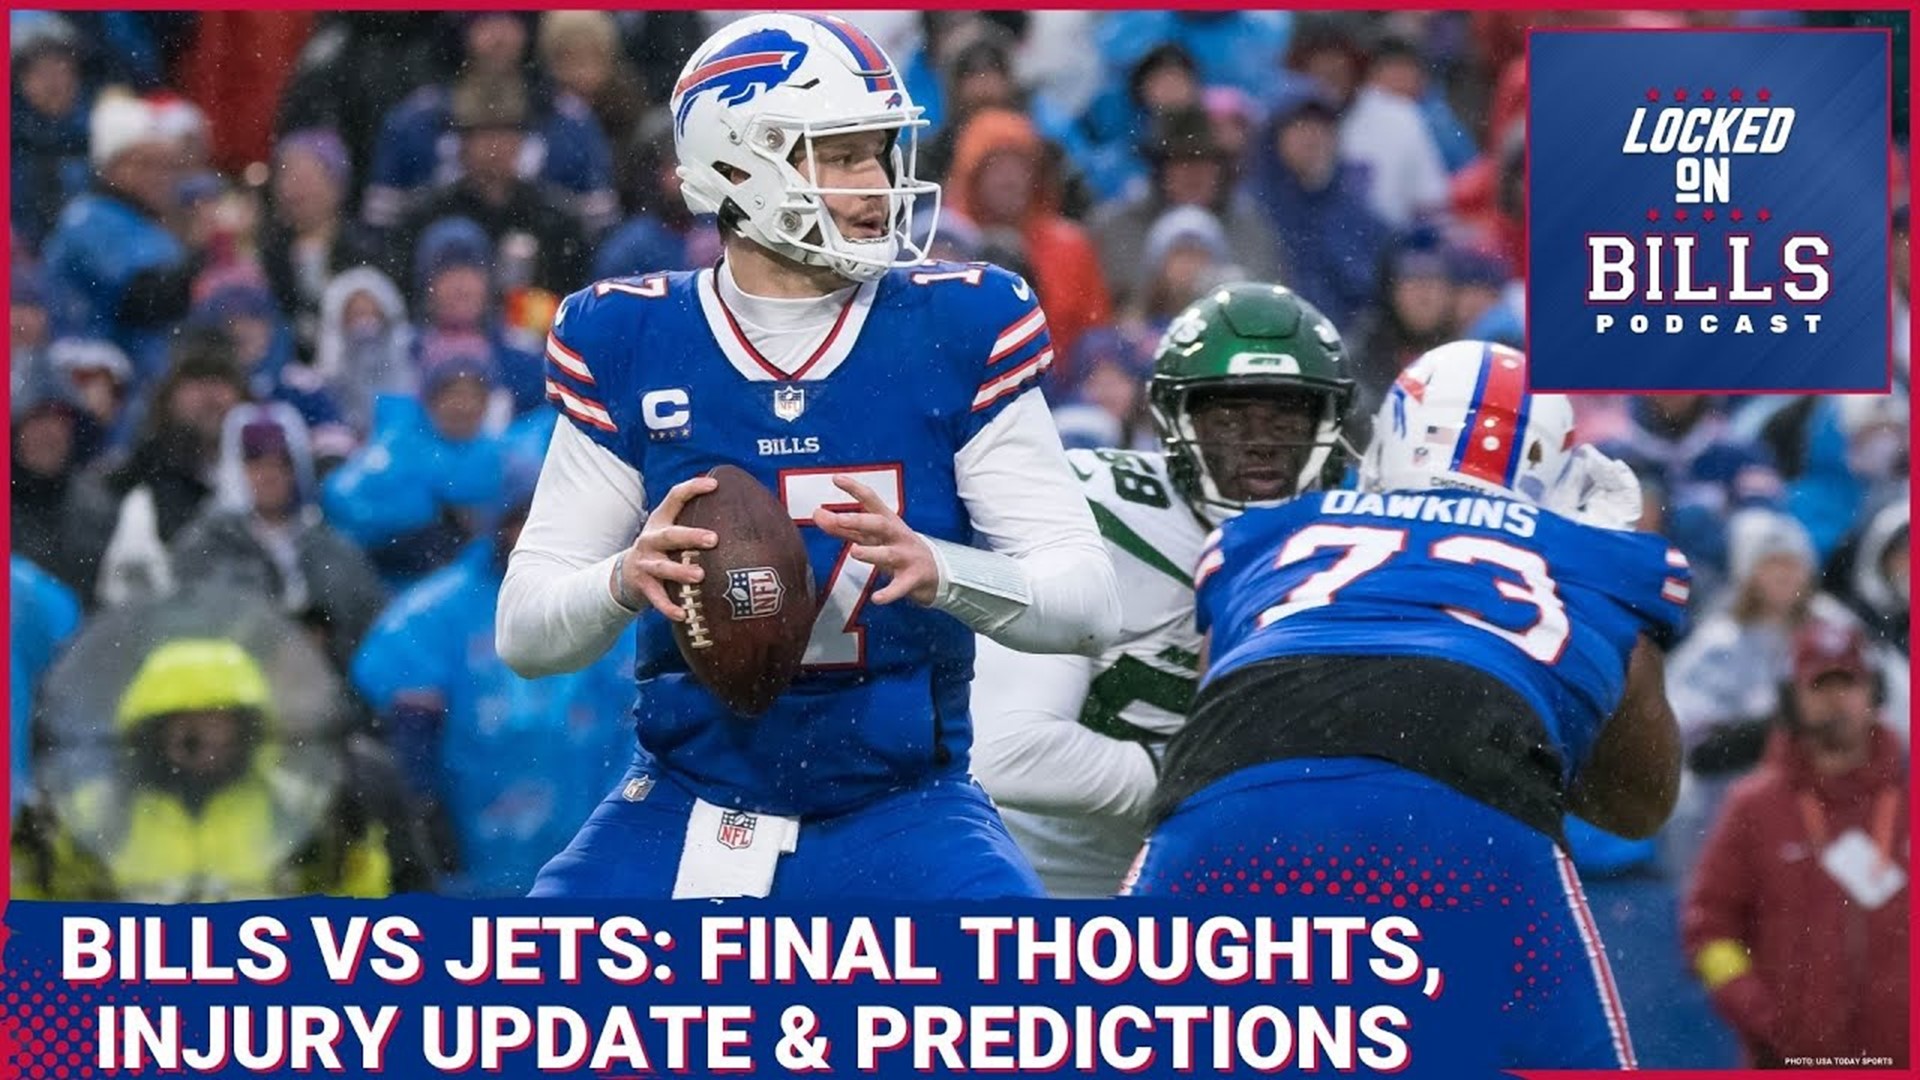 Buffalo Bills vs New York Jets. Pressure is on Jets & Aaron Rodgers, injuries & game predictions